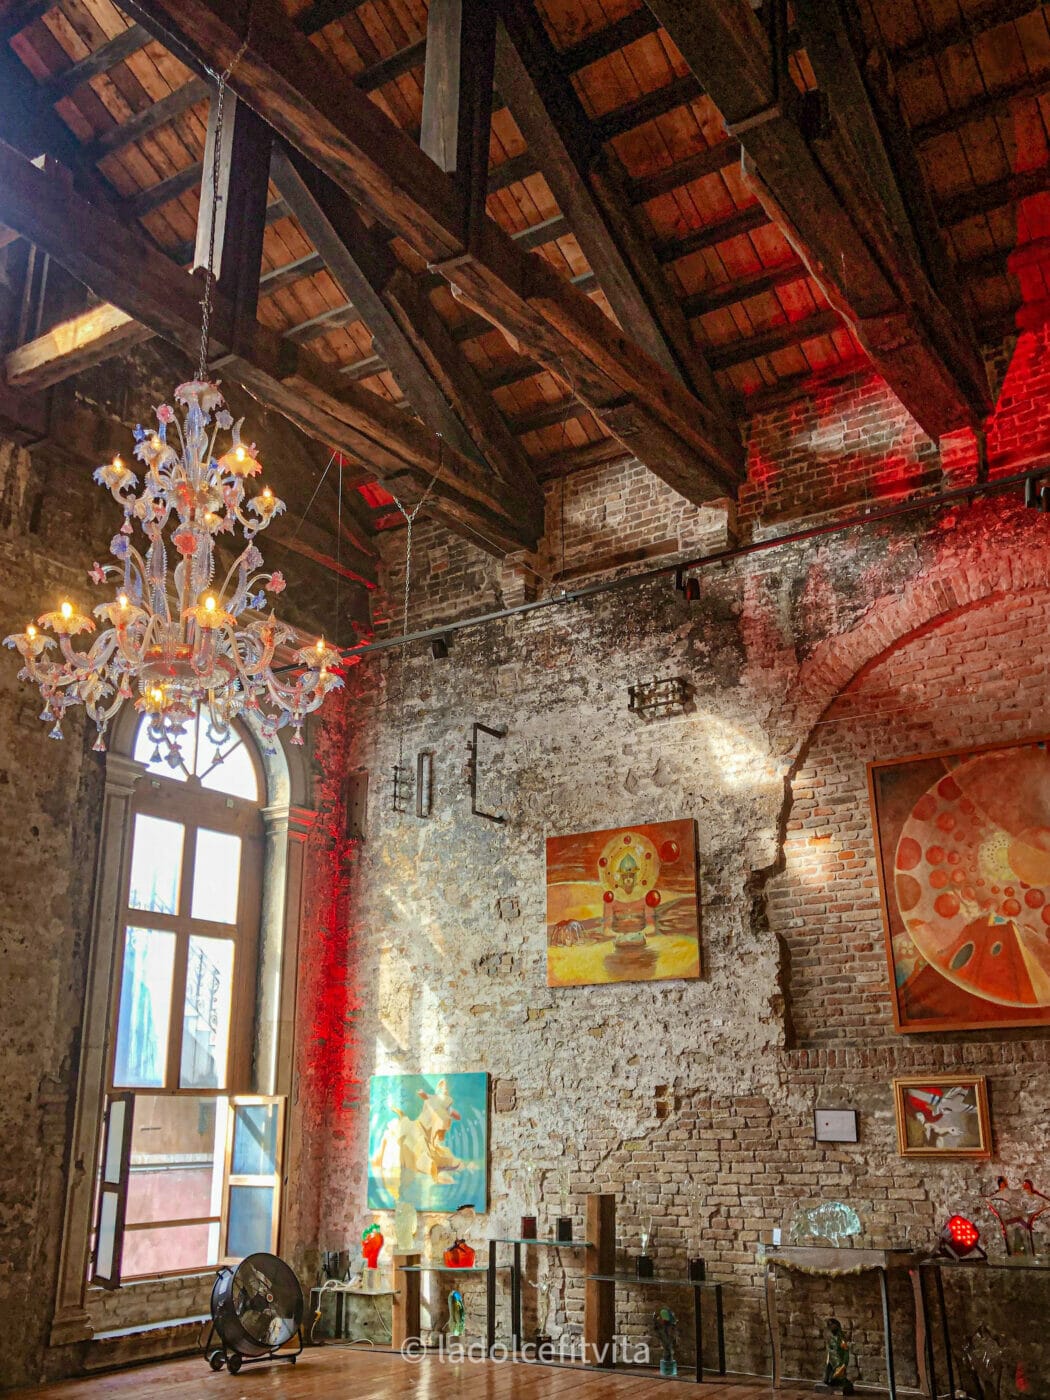 cathedral room with glass chandelier and brick wall in murano venice